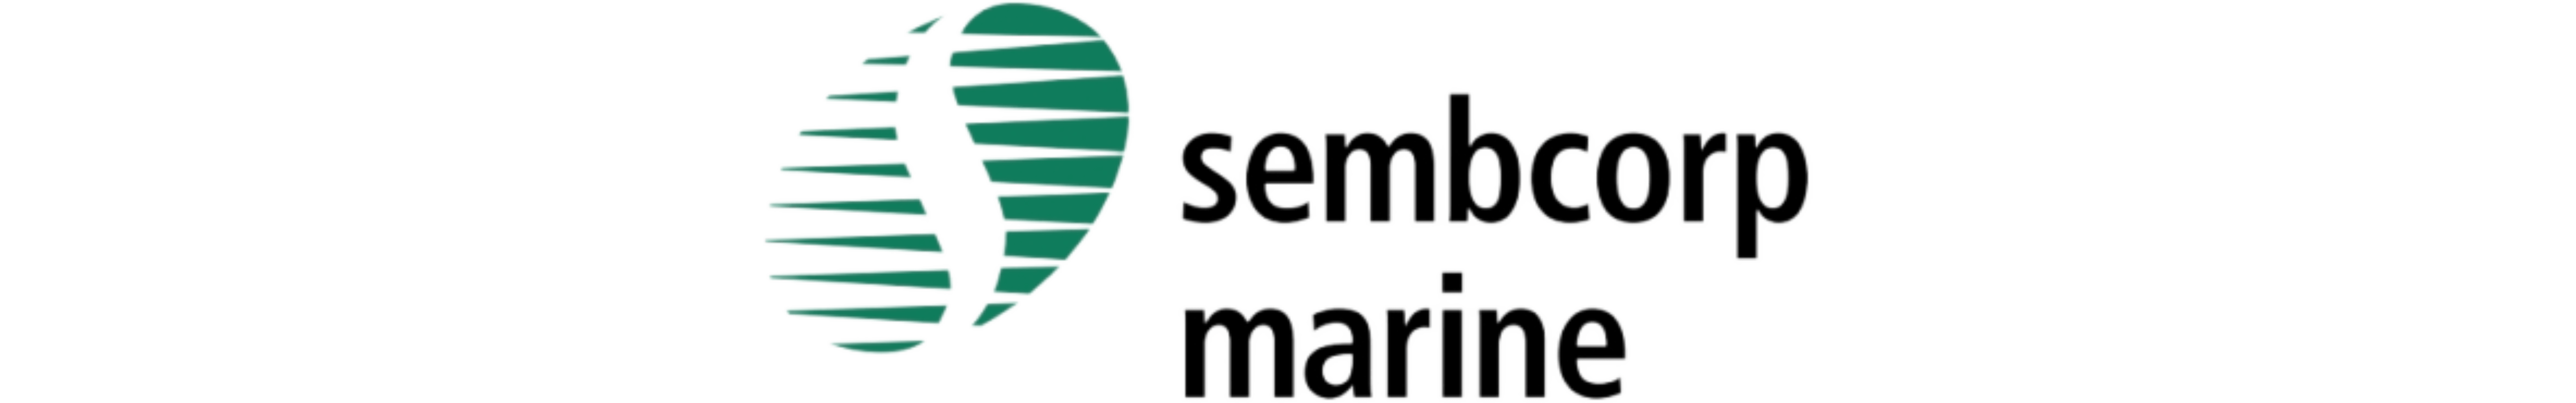 sembcorp_afc-min